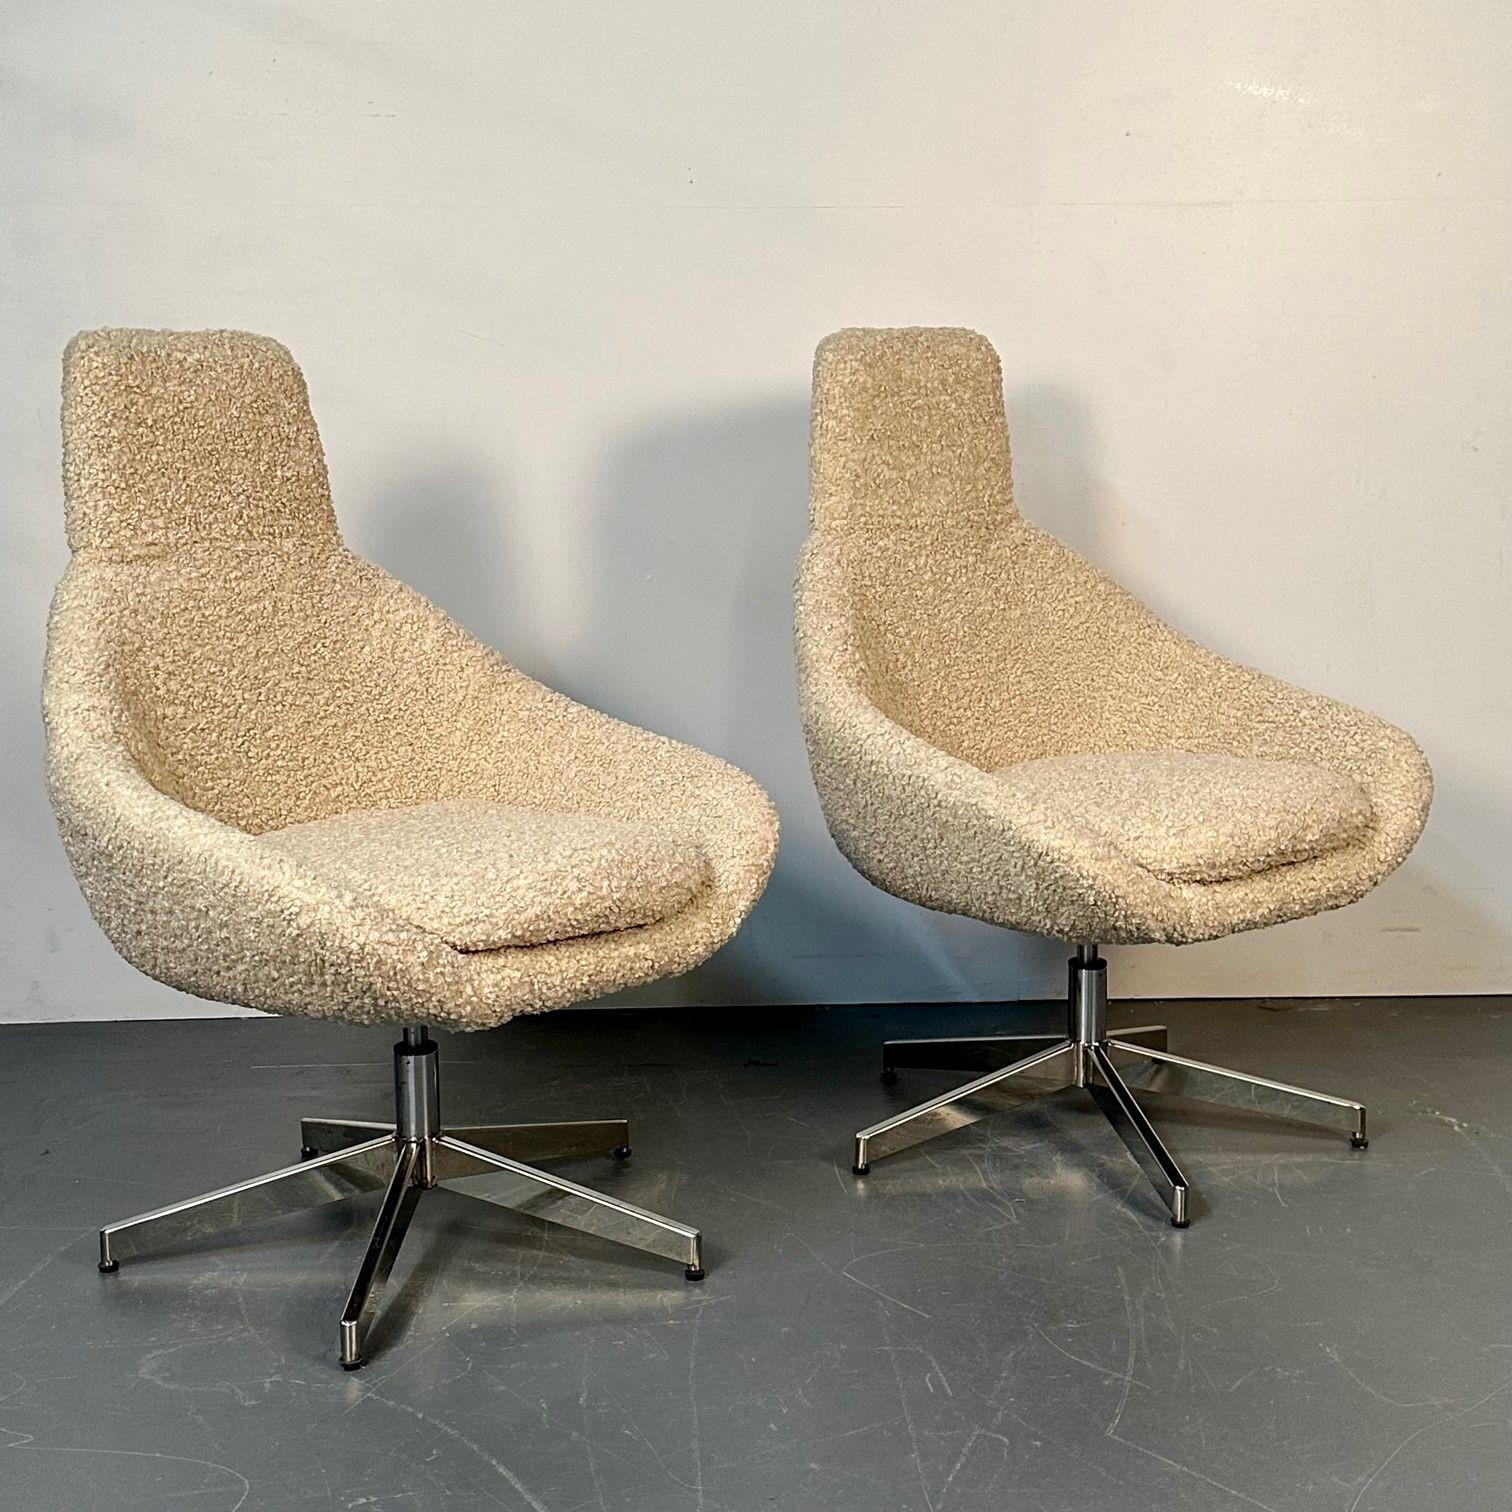 Set of 12 Mid-Century Modern office / swivel / dining chairs, white bouclé
 
Each done in a brand new white bouclé upholstery with padded seats and backrests. This finely constructed set of swivel chairs are in the style of the iconic Herman